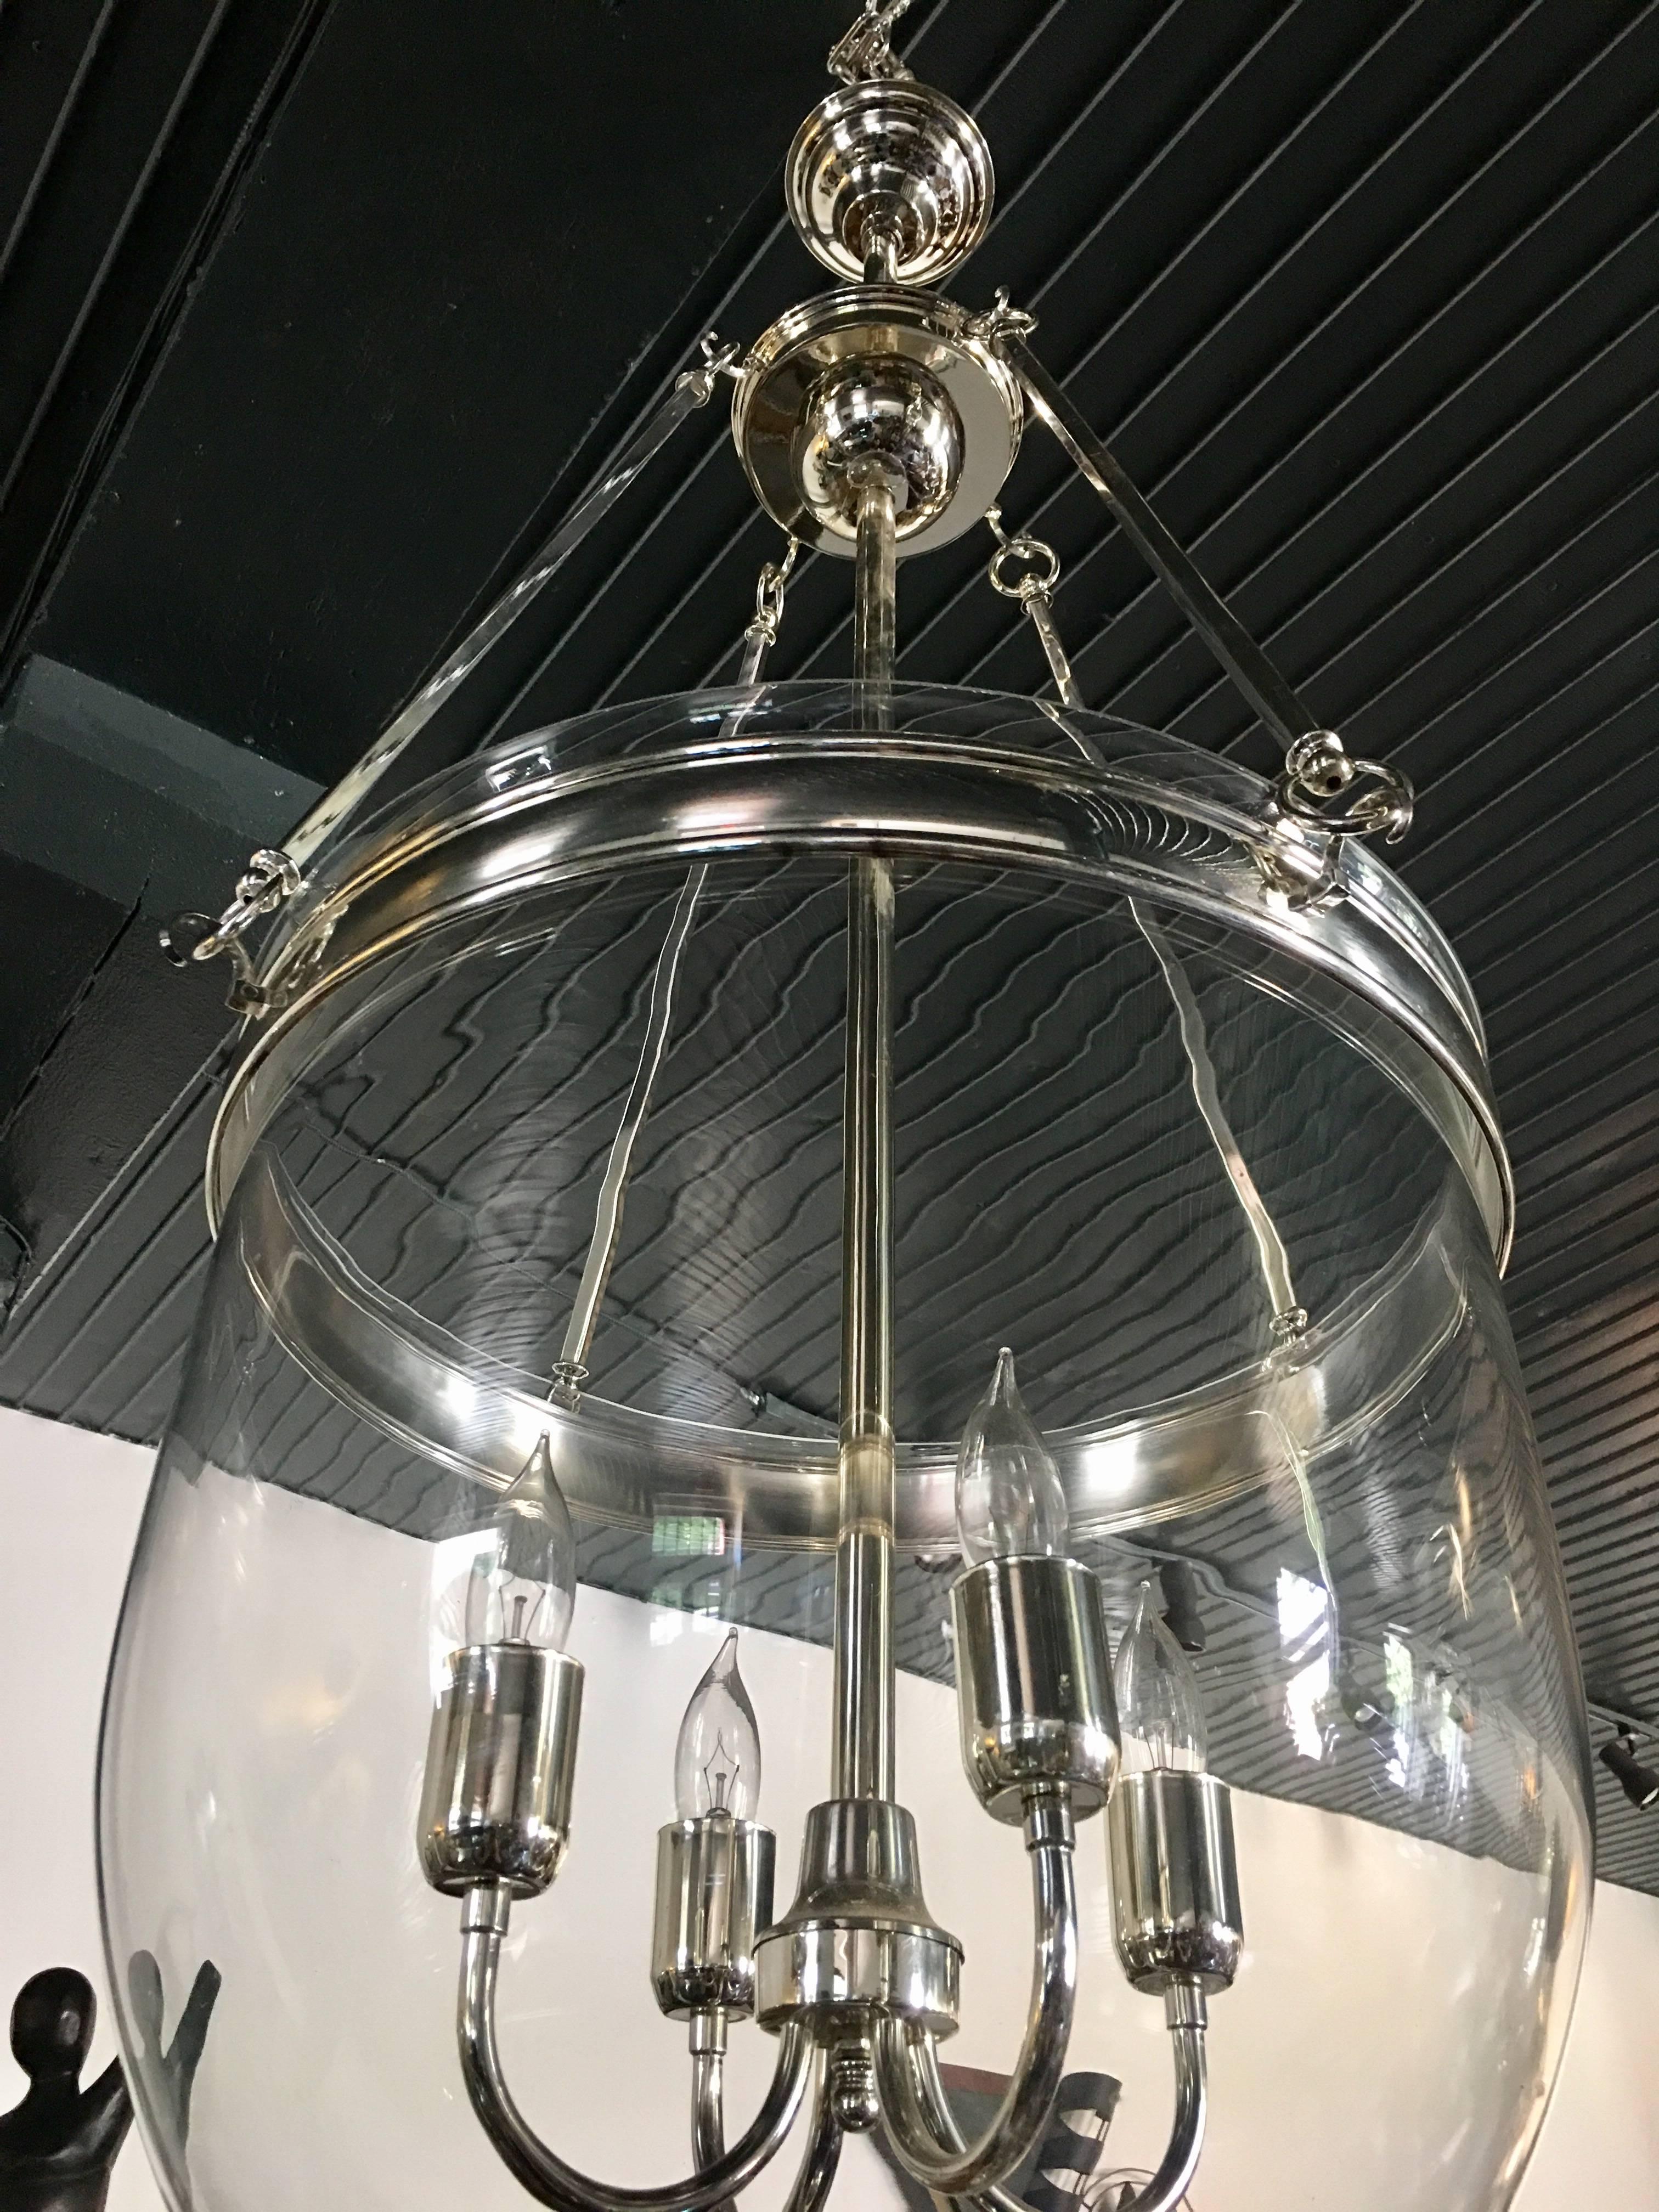 Large glass and polished chrome hurricane dome pendant light fixture. Removable clear glass bell jar is suspended from four square rods. Centre holds four standard base candle bulbs.

Measure: Height is adjustable. Length of fixture from bottom